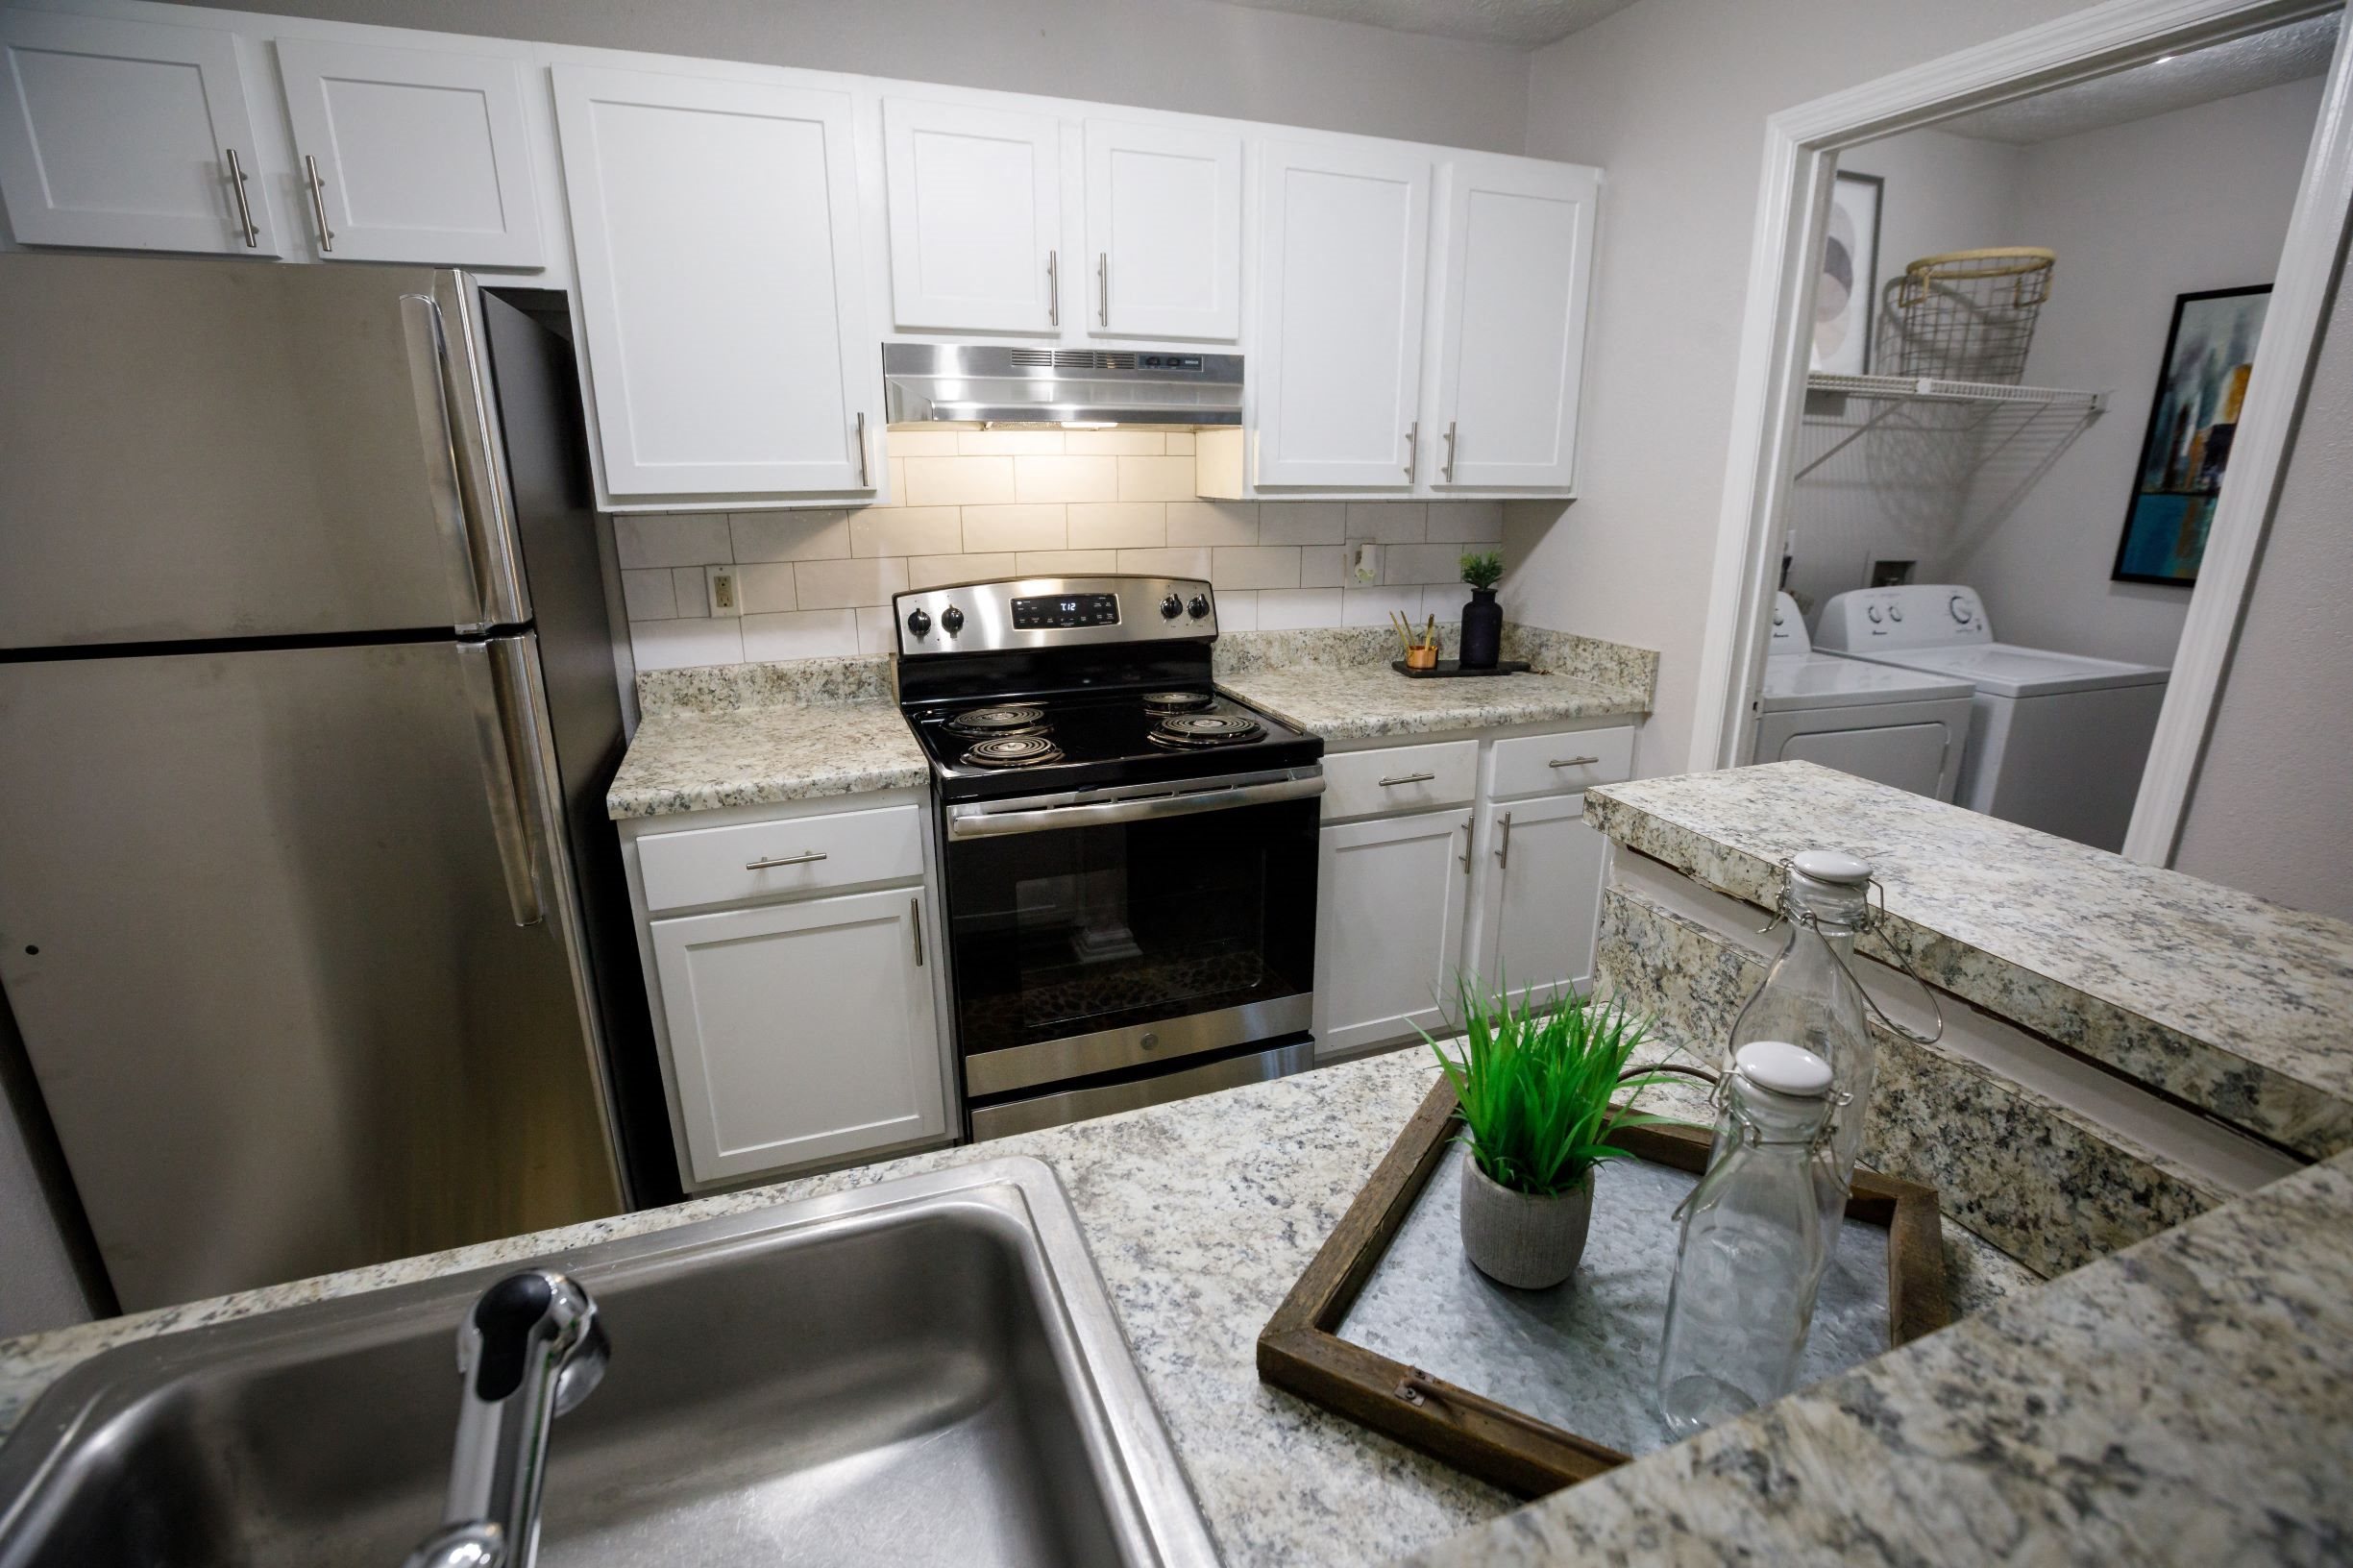 Renovated Kitchen at The Avenues of North Decatur in Decatur, GA.